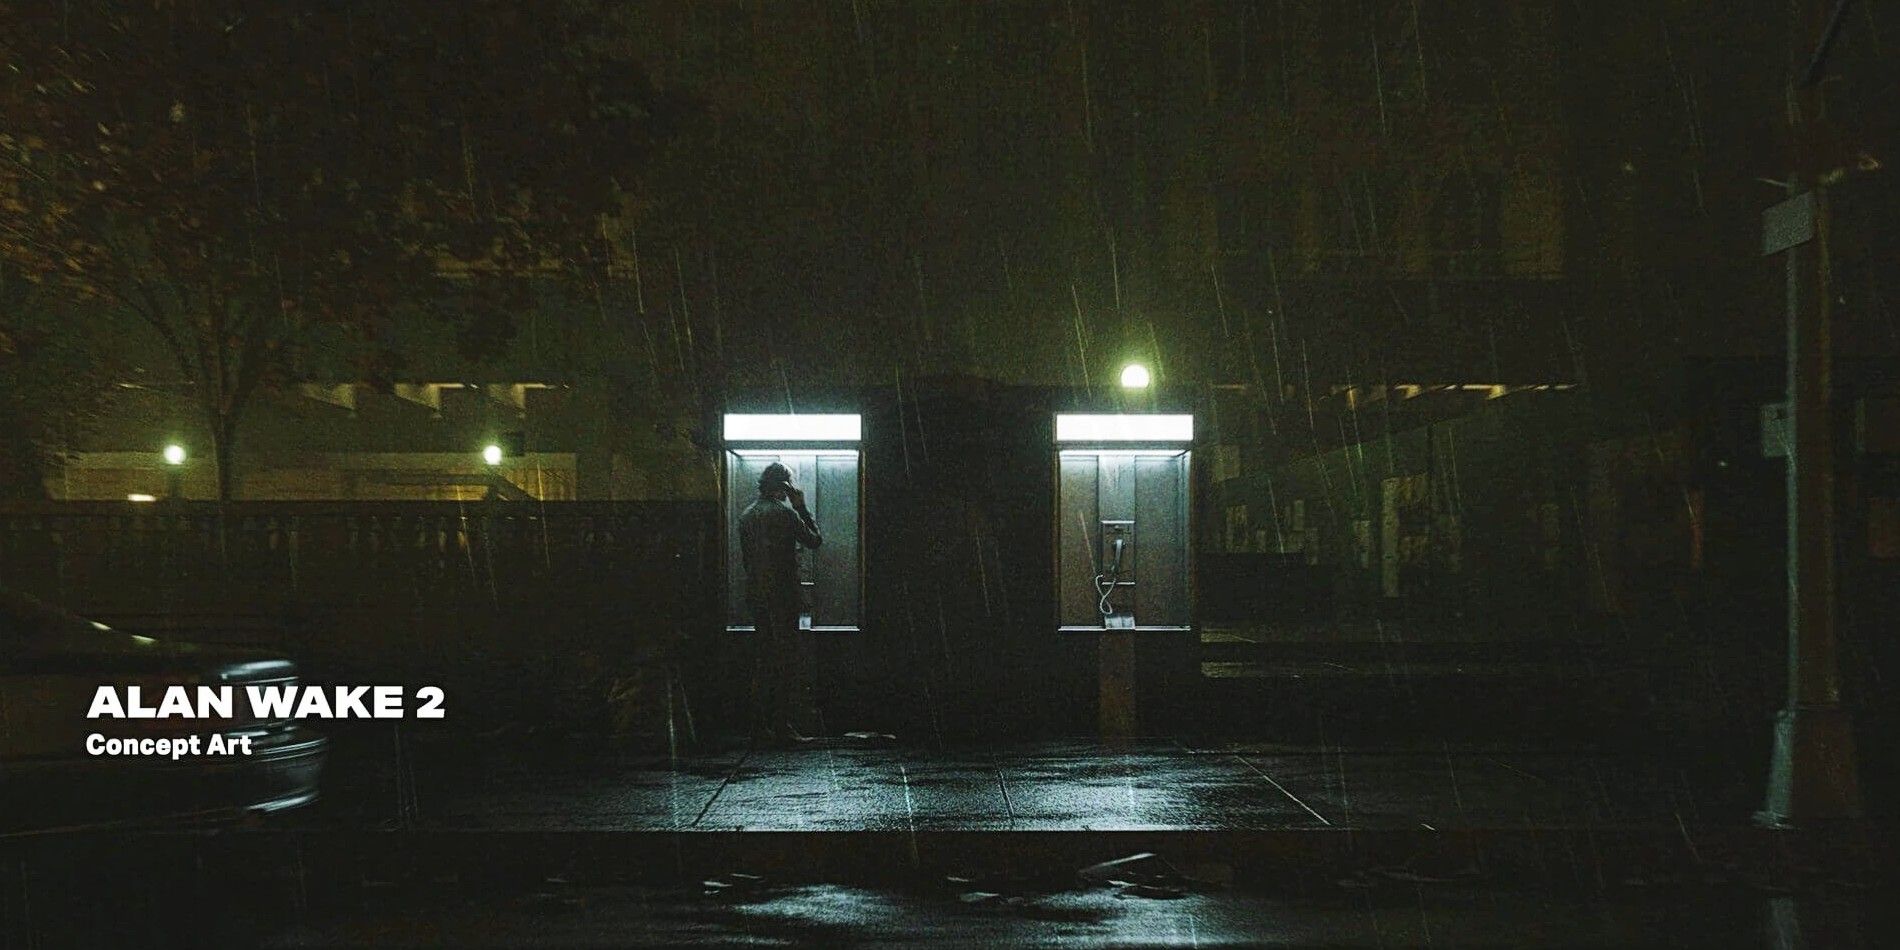 Concept art depicting Alan using a phone booth in the upcoming Alan Wake sequel, courtesy of Remedy.